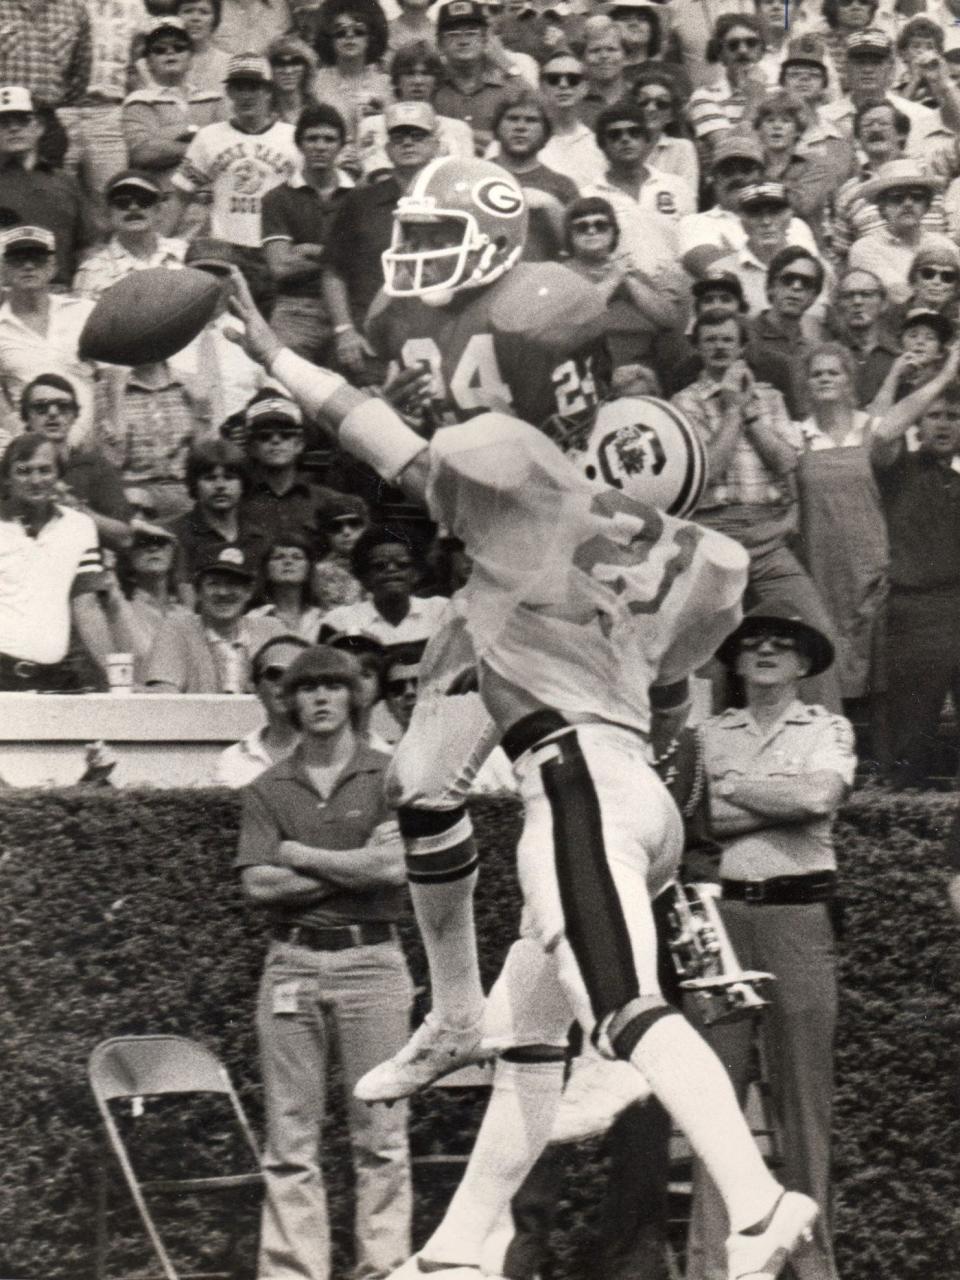 Southside graduate Andy Hastings, playing for South Carolina, knocks down a pass intended for Georgia's Lindsay Scott. Hastings played for South Carolina in 1978 and 1979.